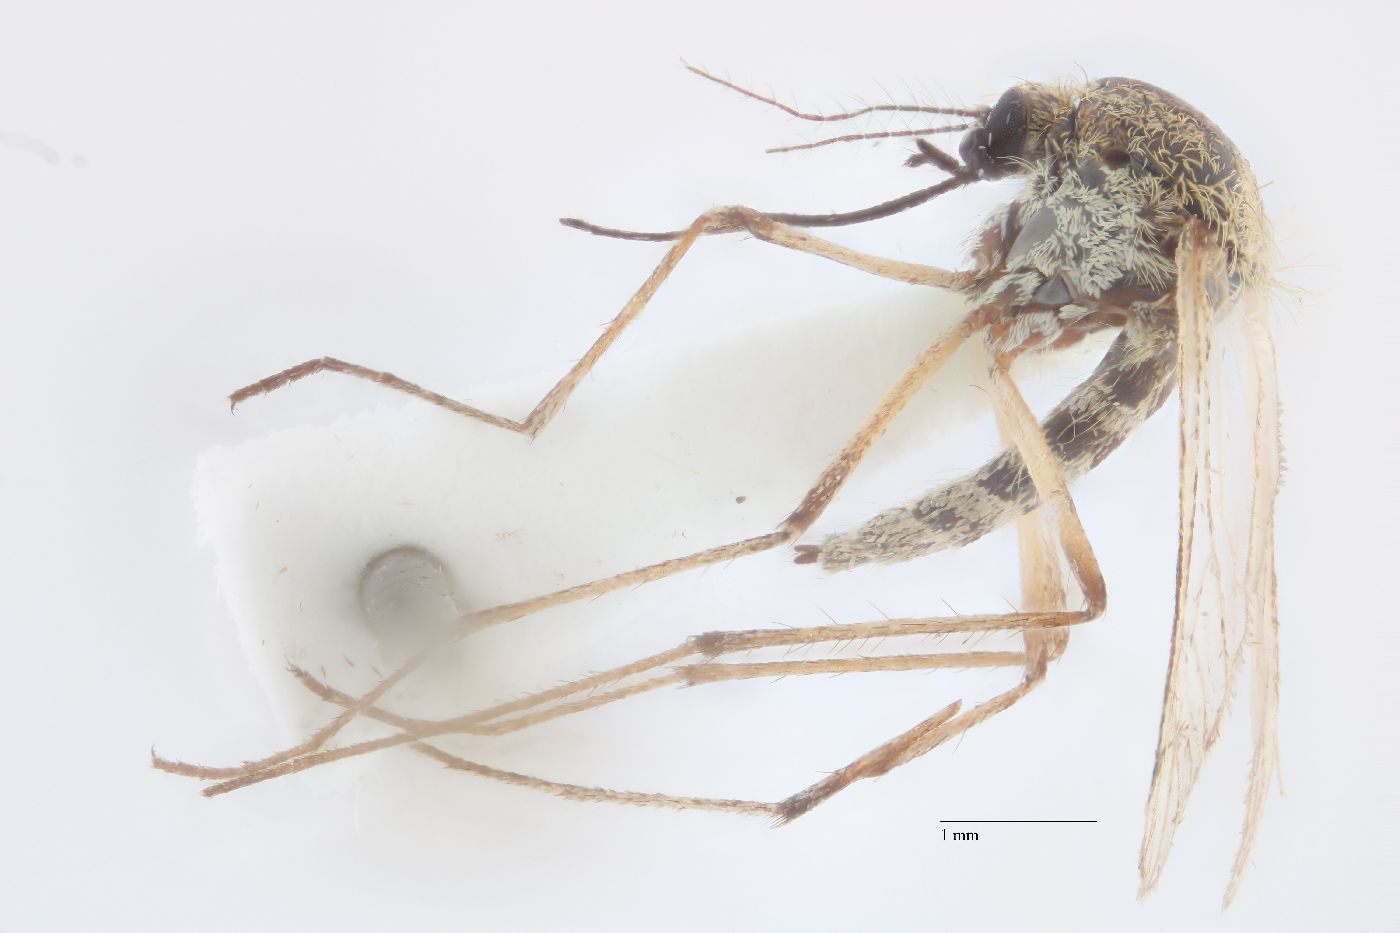 Aedes image